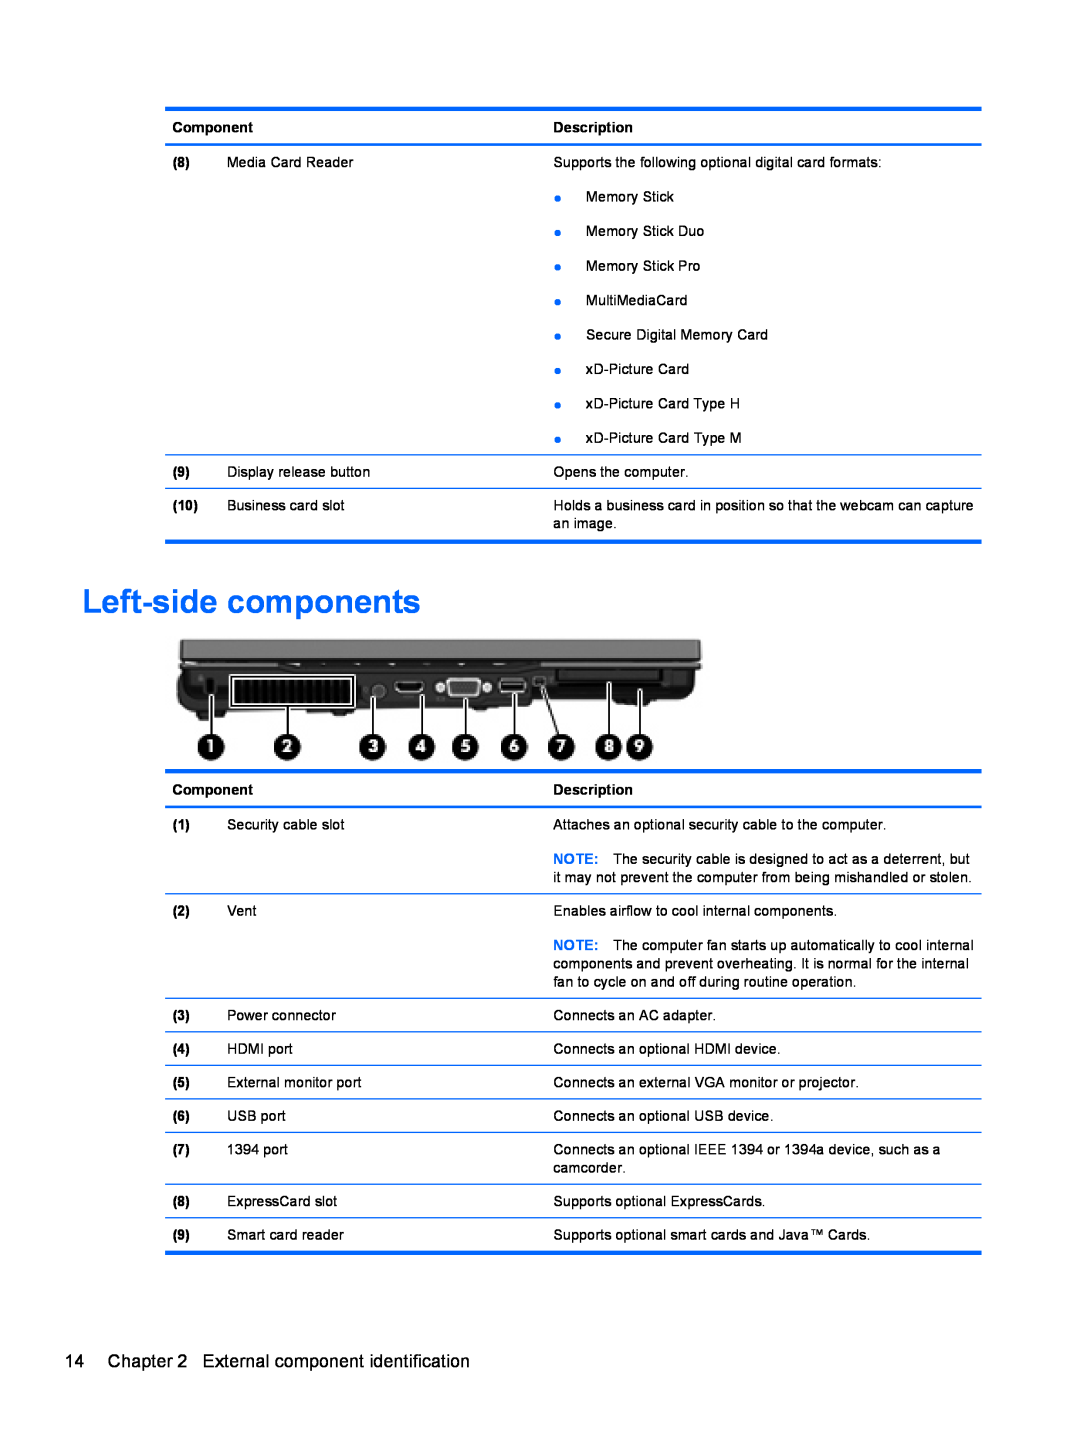 HP FN038UAABA, FN037UAABA manual Left-side components, External component identification 